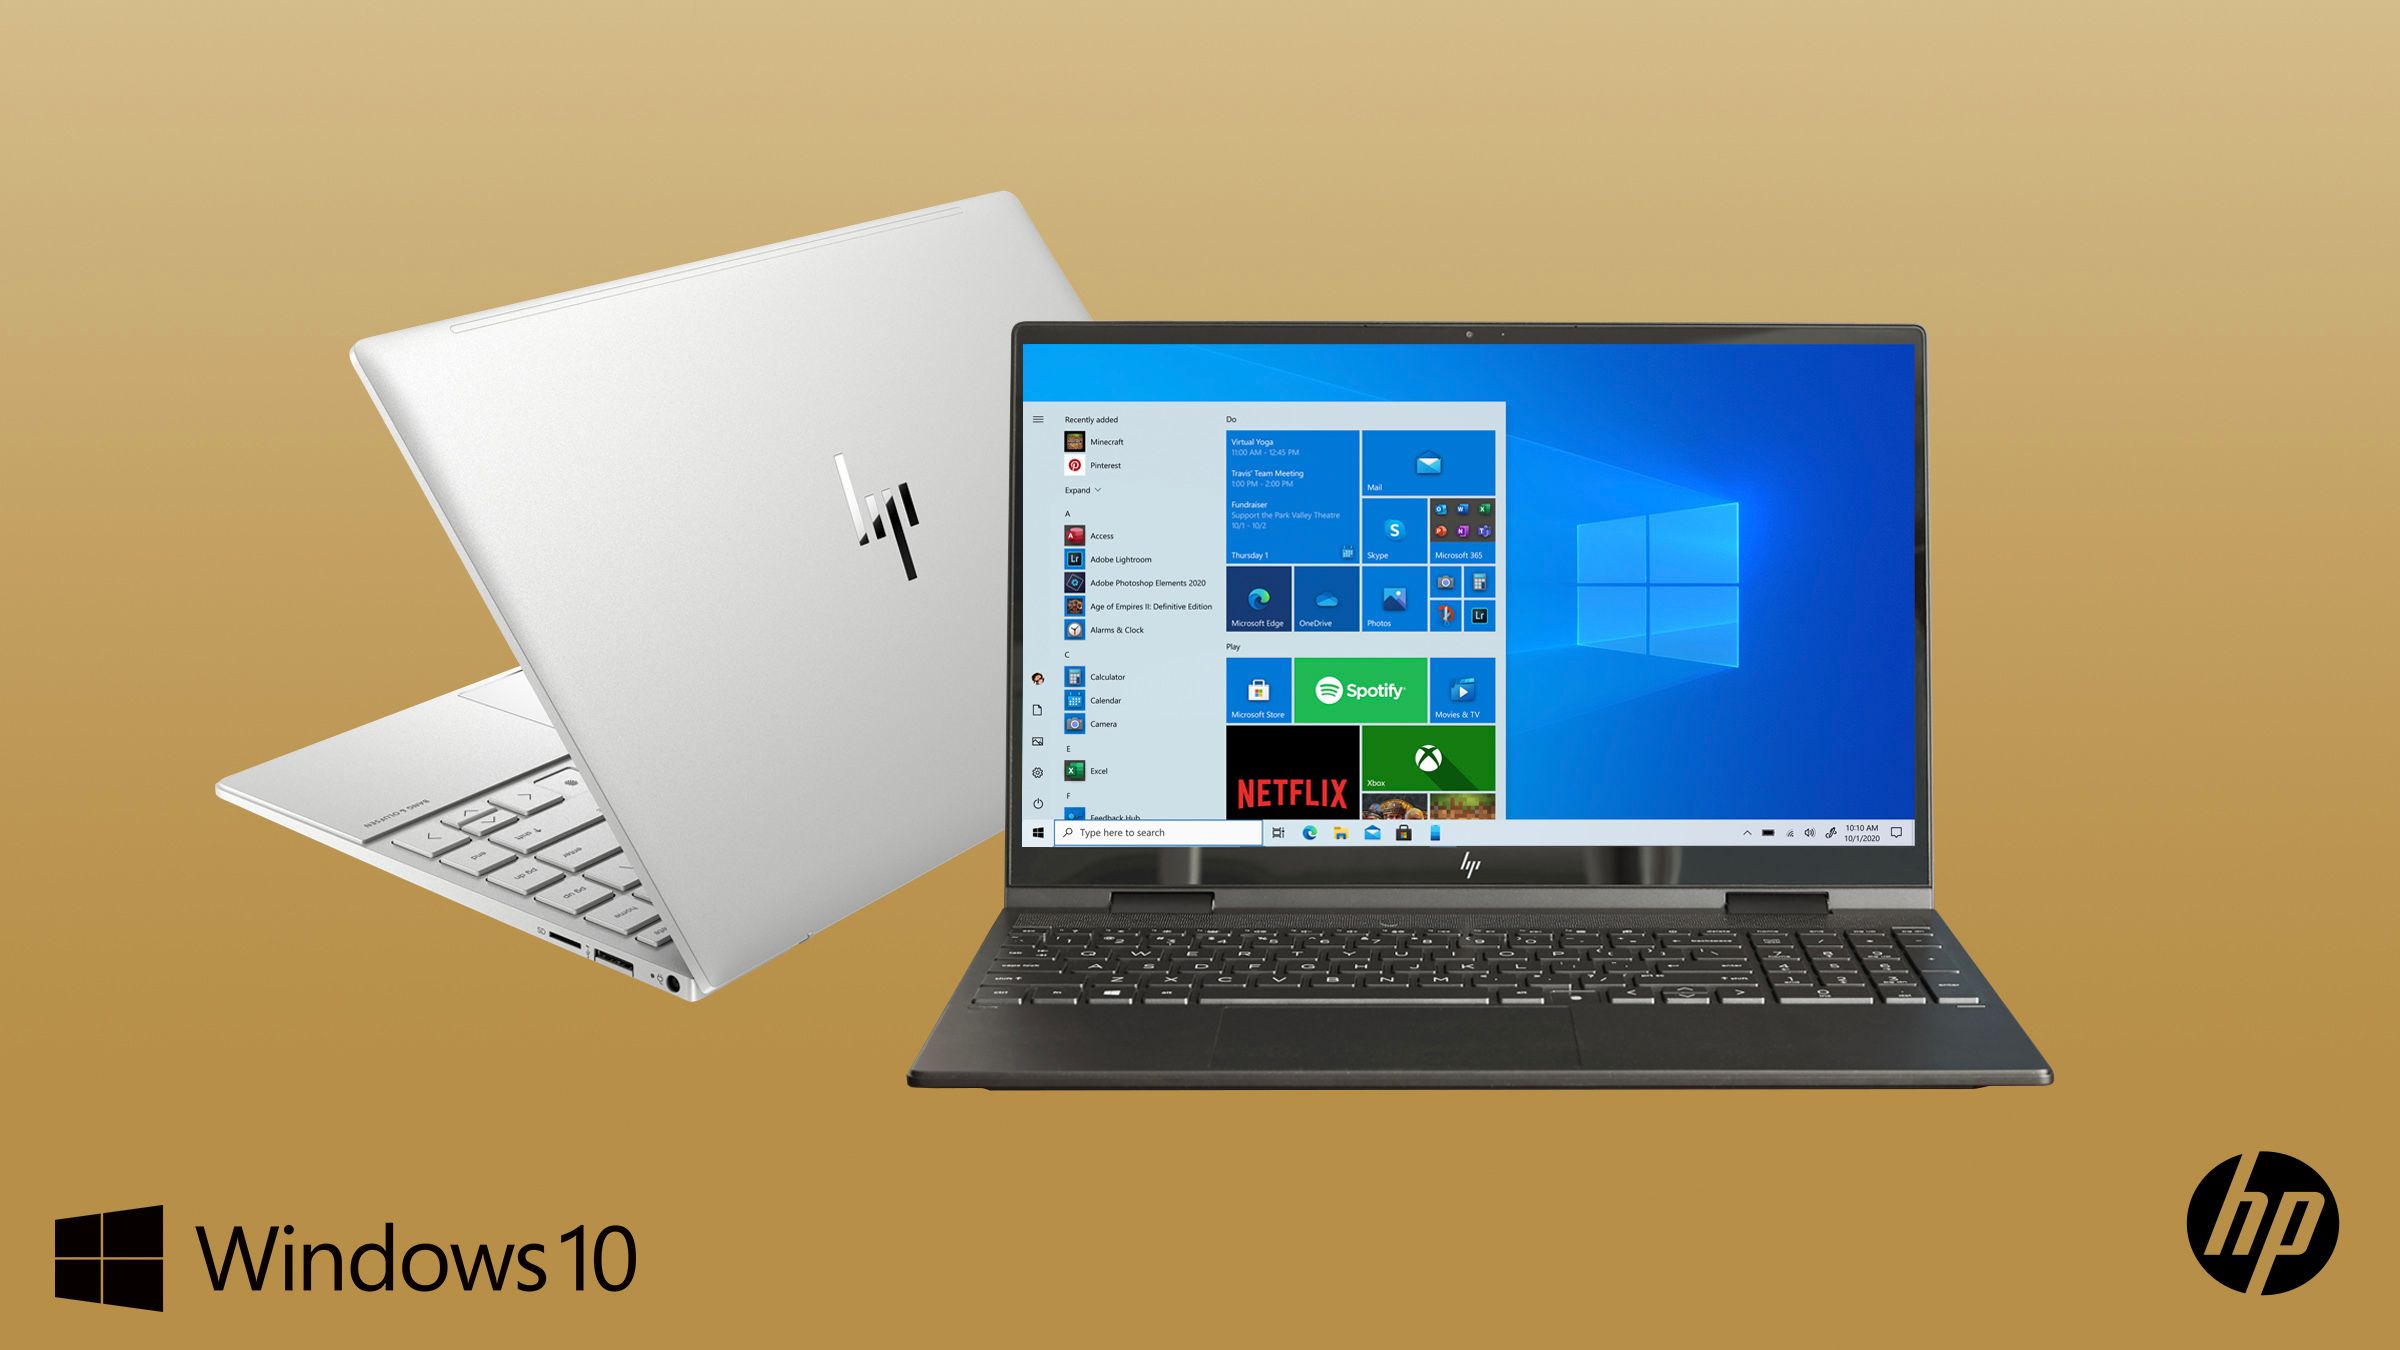 HP ENVY Range - Discover the best of HP and Windows 10